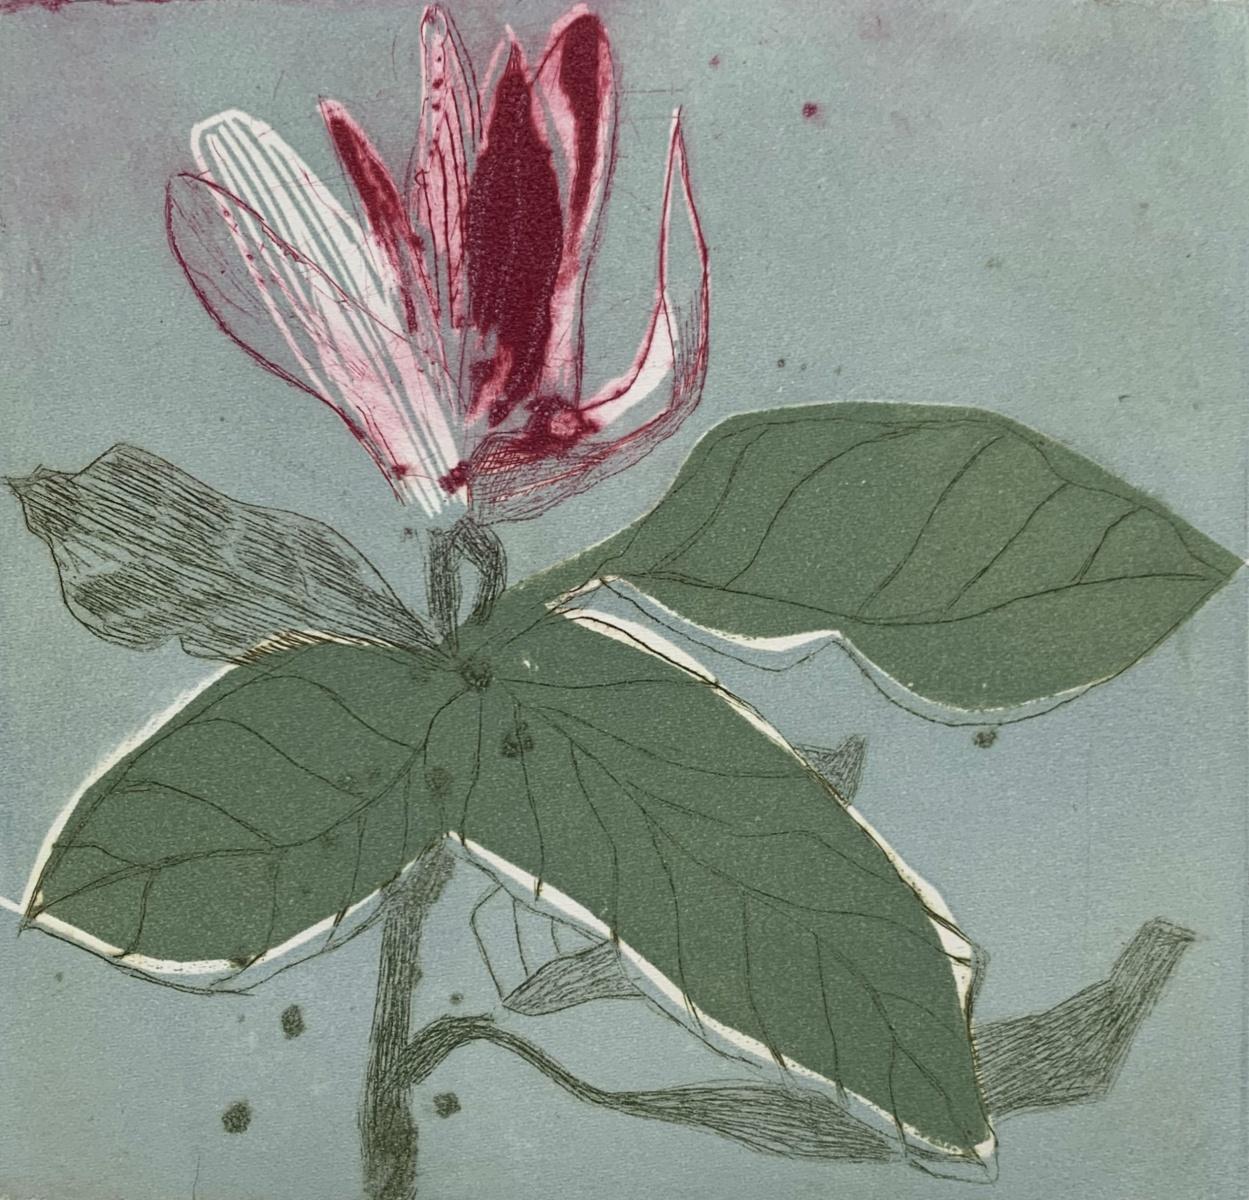 Magnolia 10 - Contemporary Figurative Drypoint Etching Print, Flower, Floral